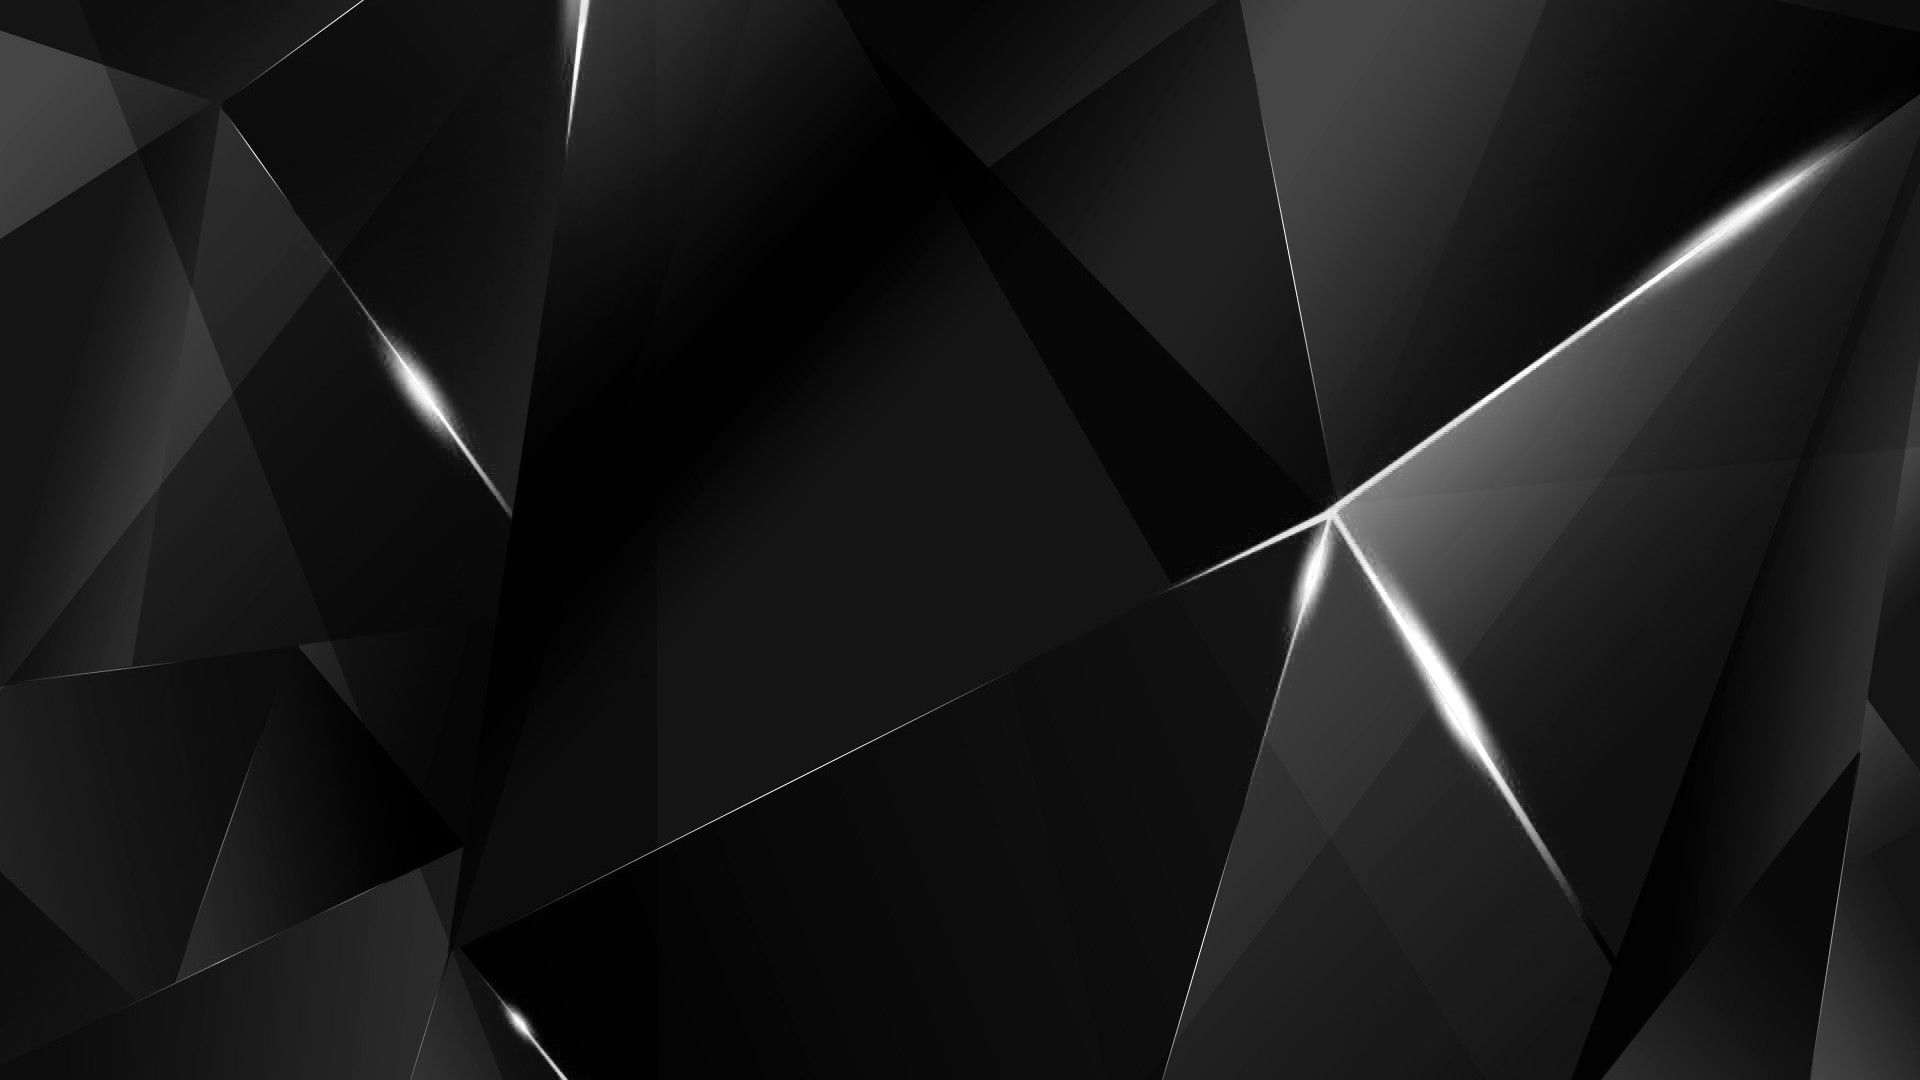 Wallpapers – White Abstract Polygons Black BG by kaminohunter